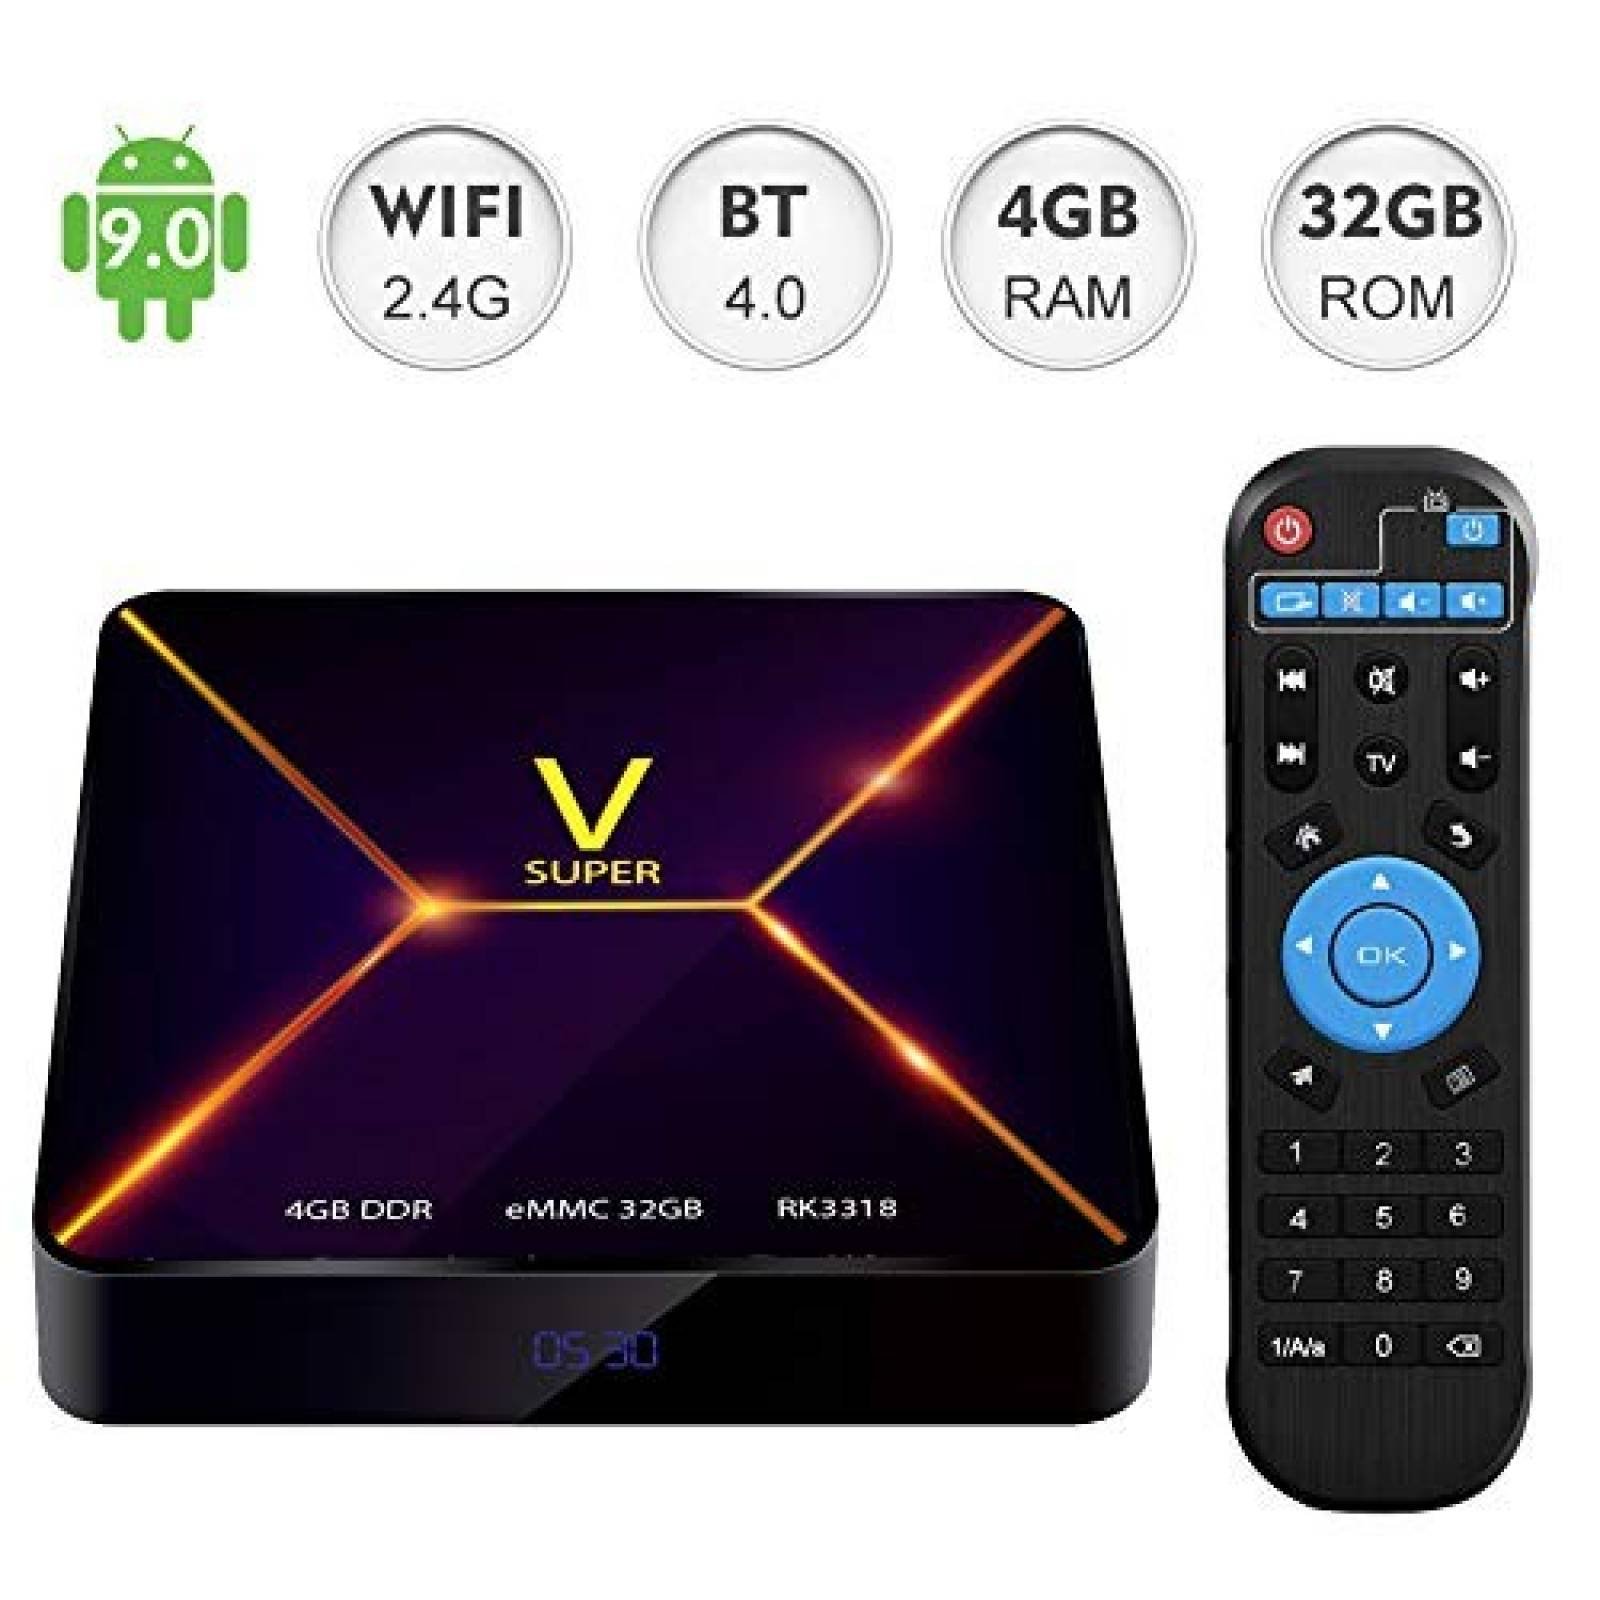 Reproductor de streaming EVER EXPRESS Android 9.0 4GB -Negro